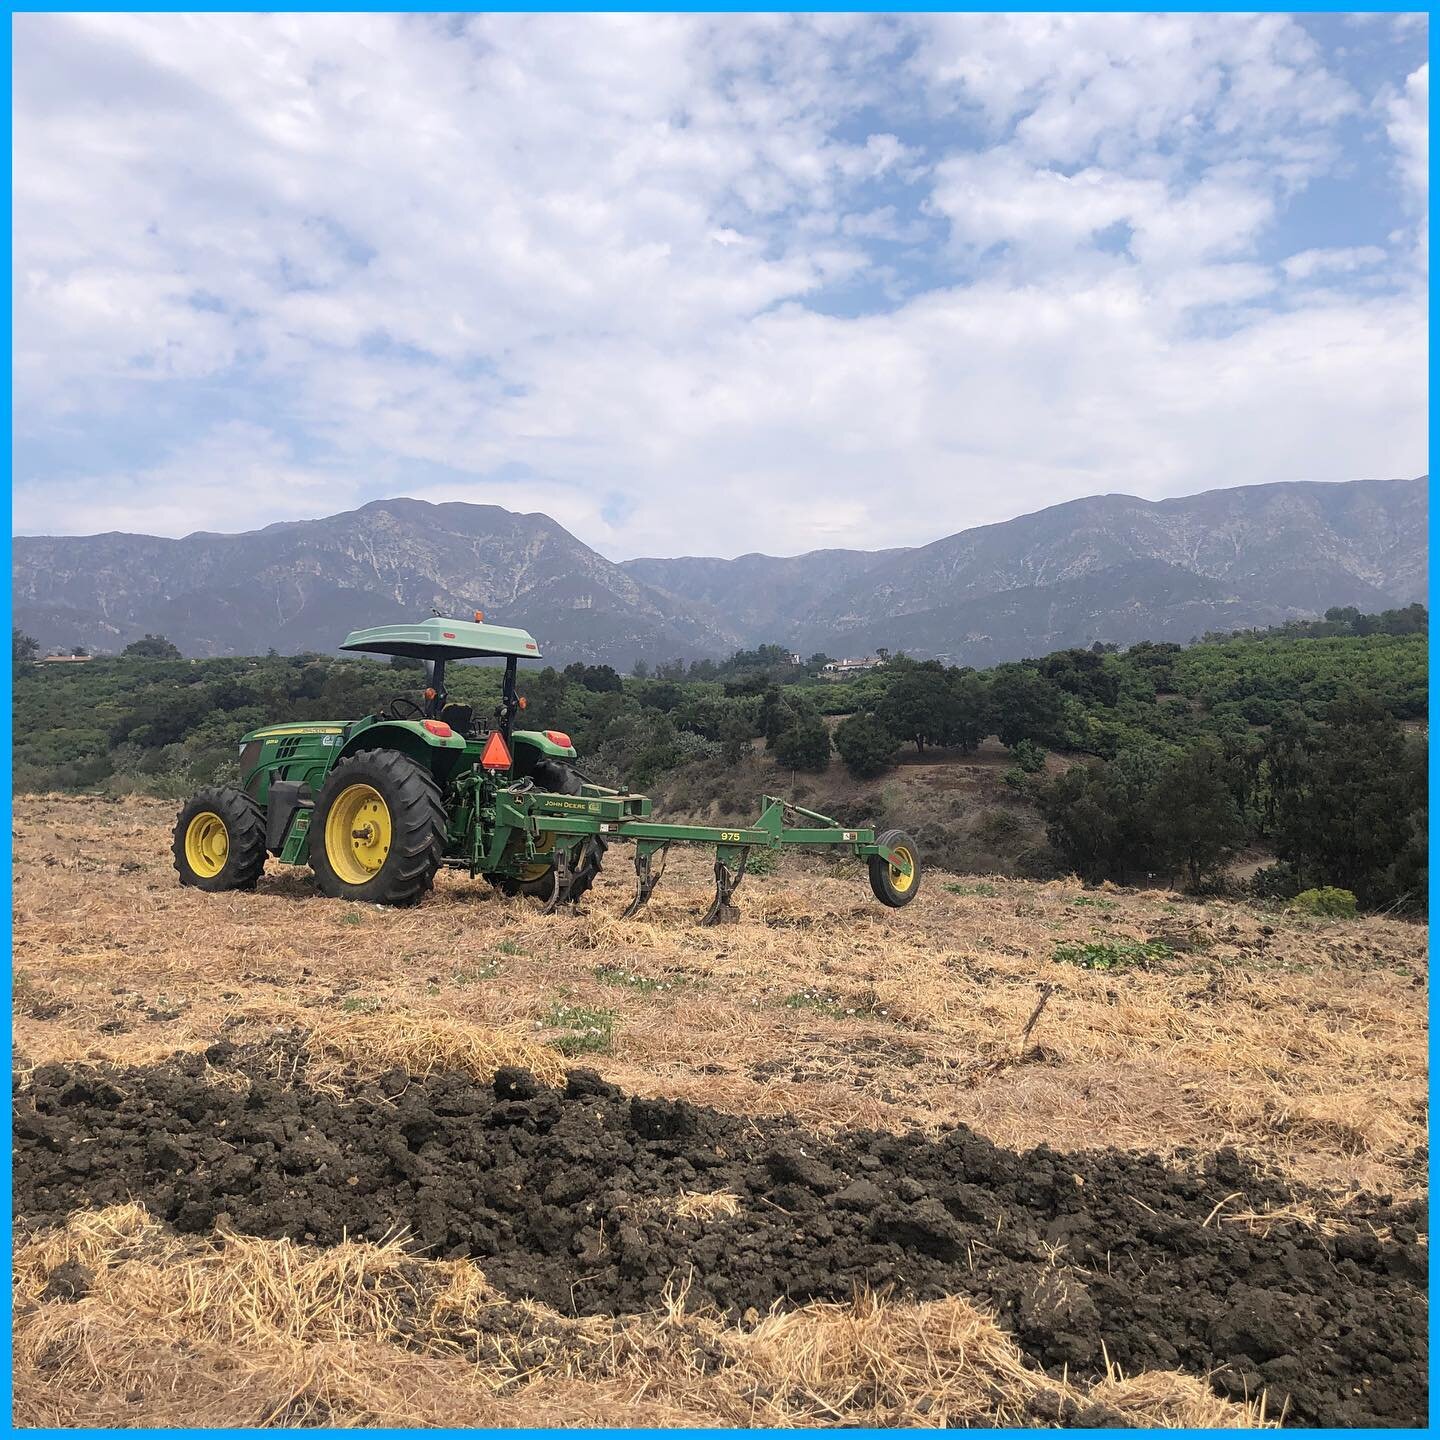 We have a new and exciting client to share with you... details coming soon!
🚜 
🌺 
#new #farmlife #tractor #socialmedia #centralcoast #california #yosocial #whatareyoupostingfor